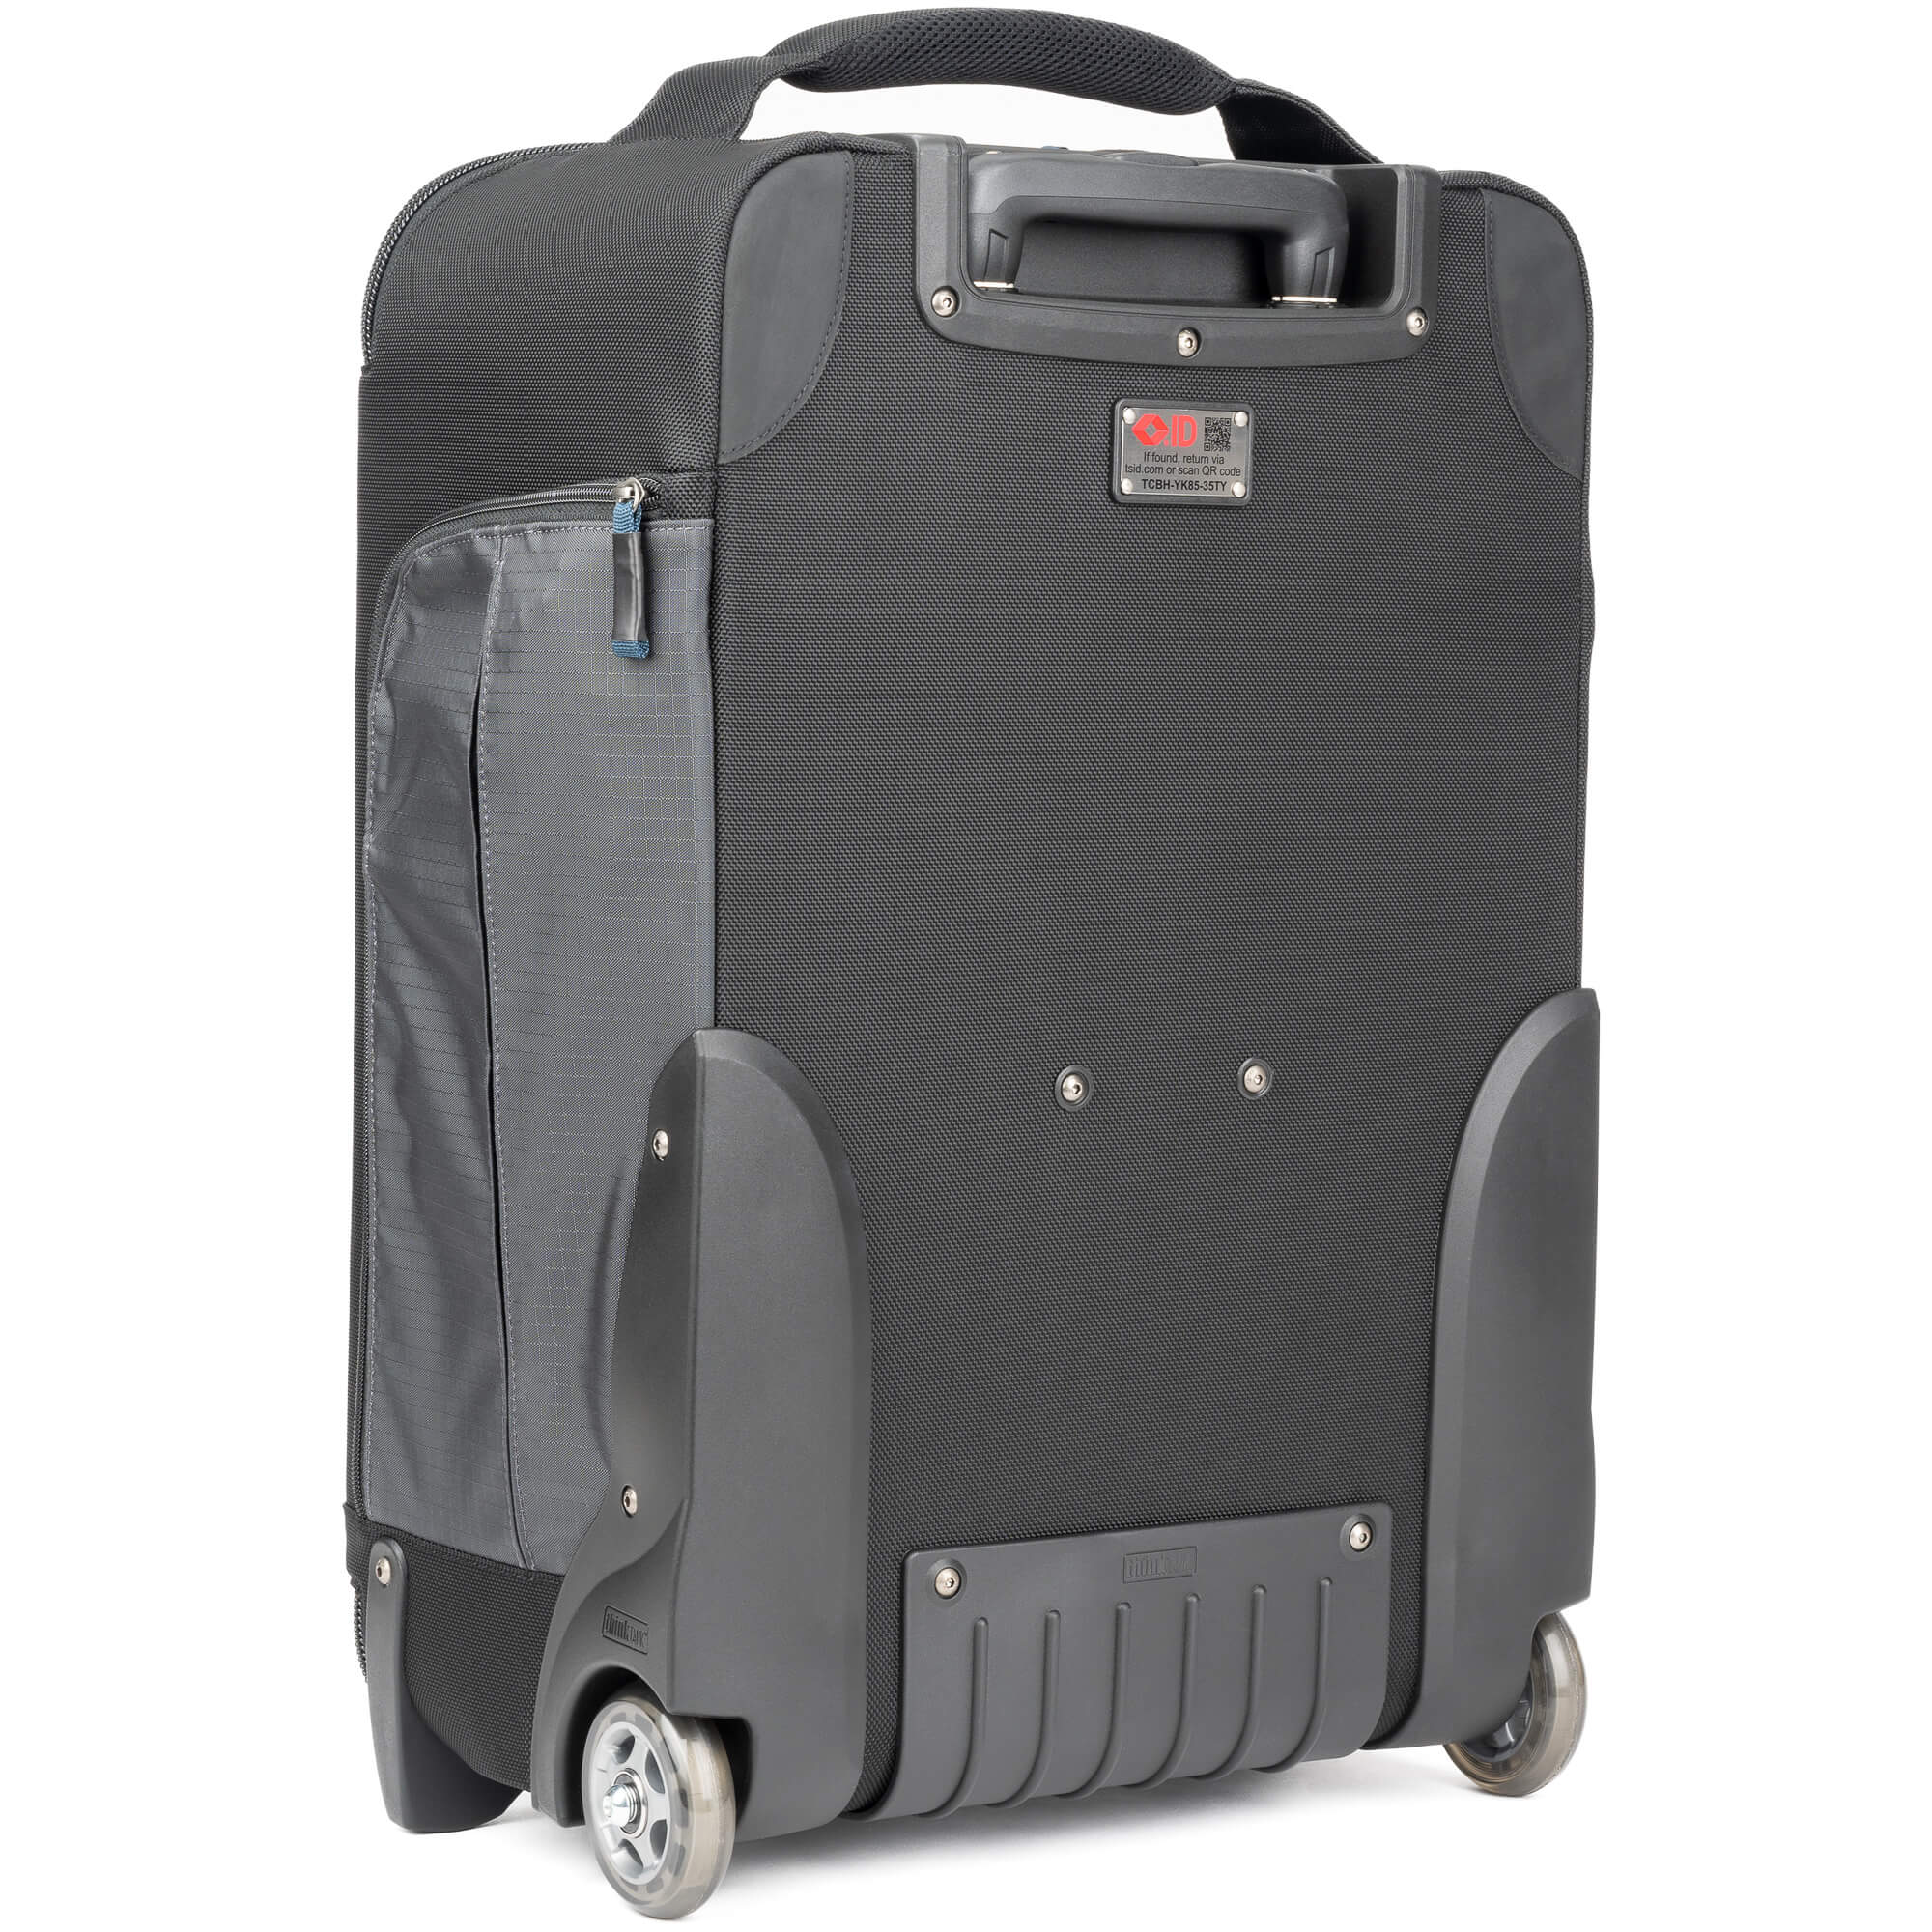 Rugged materials and user-replaceable parts extending the life of the suitcase